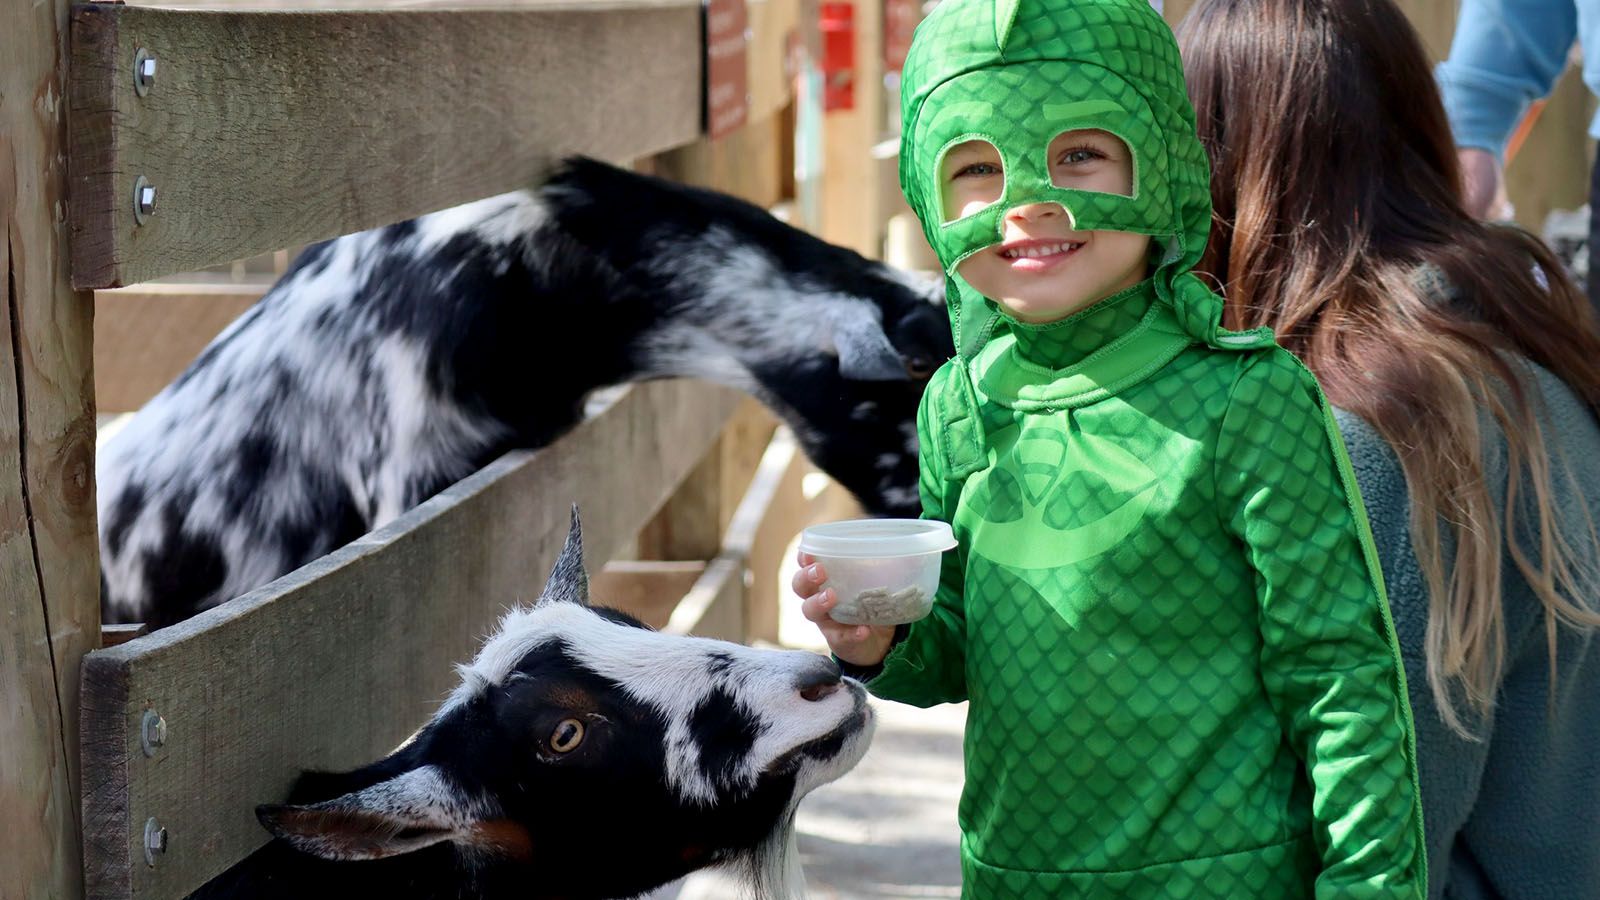 Wild Zoo Halloween continues at Fort Wayne Children's Zoo each Saturday and Sunday through October.